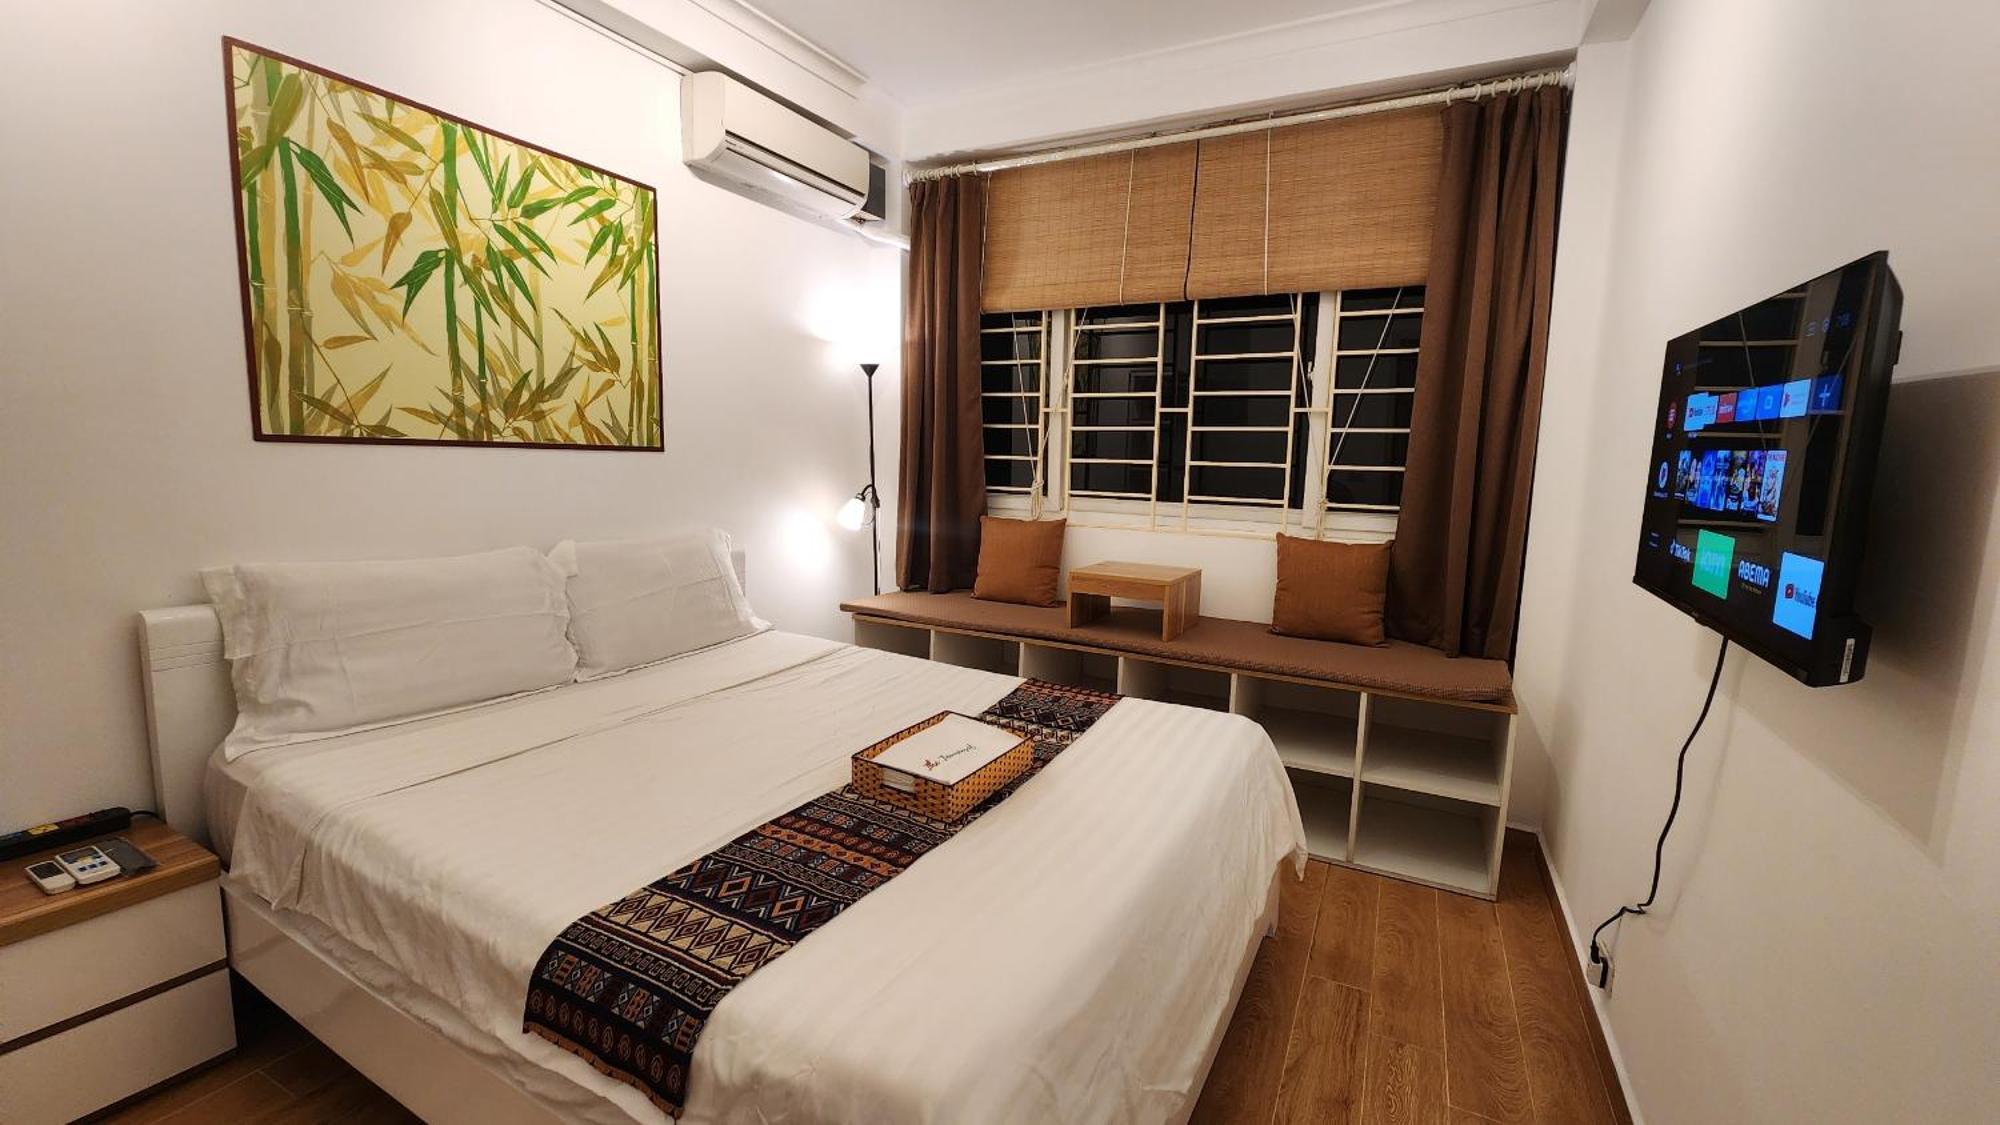 Top Location 3-4-5 Bedrooms House In Centre Of Ha Noi - Clean, Cozy And Private - The Tournesol 河内 外观 照片